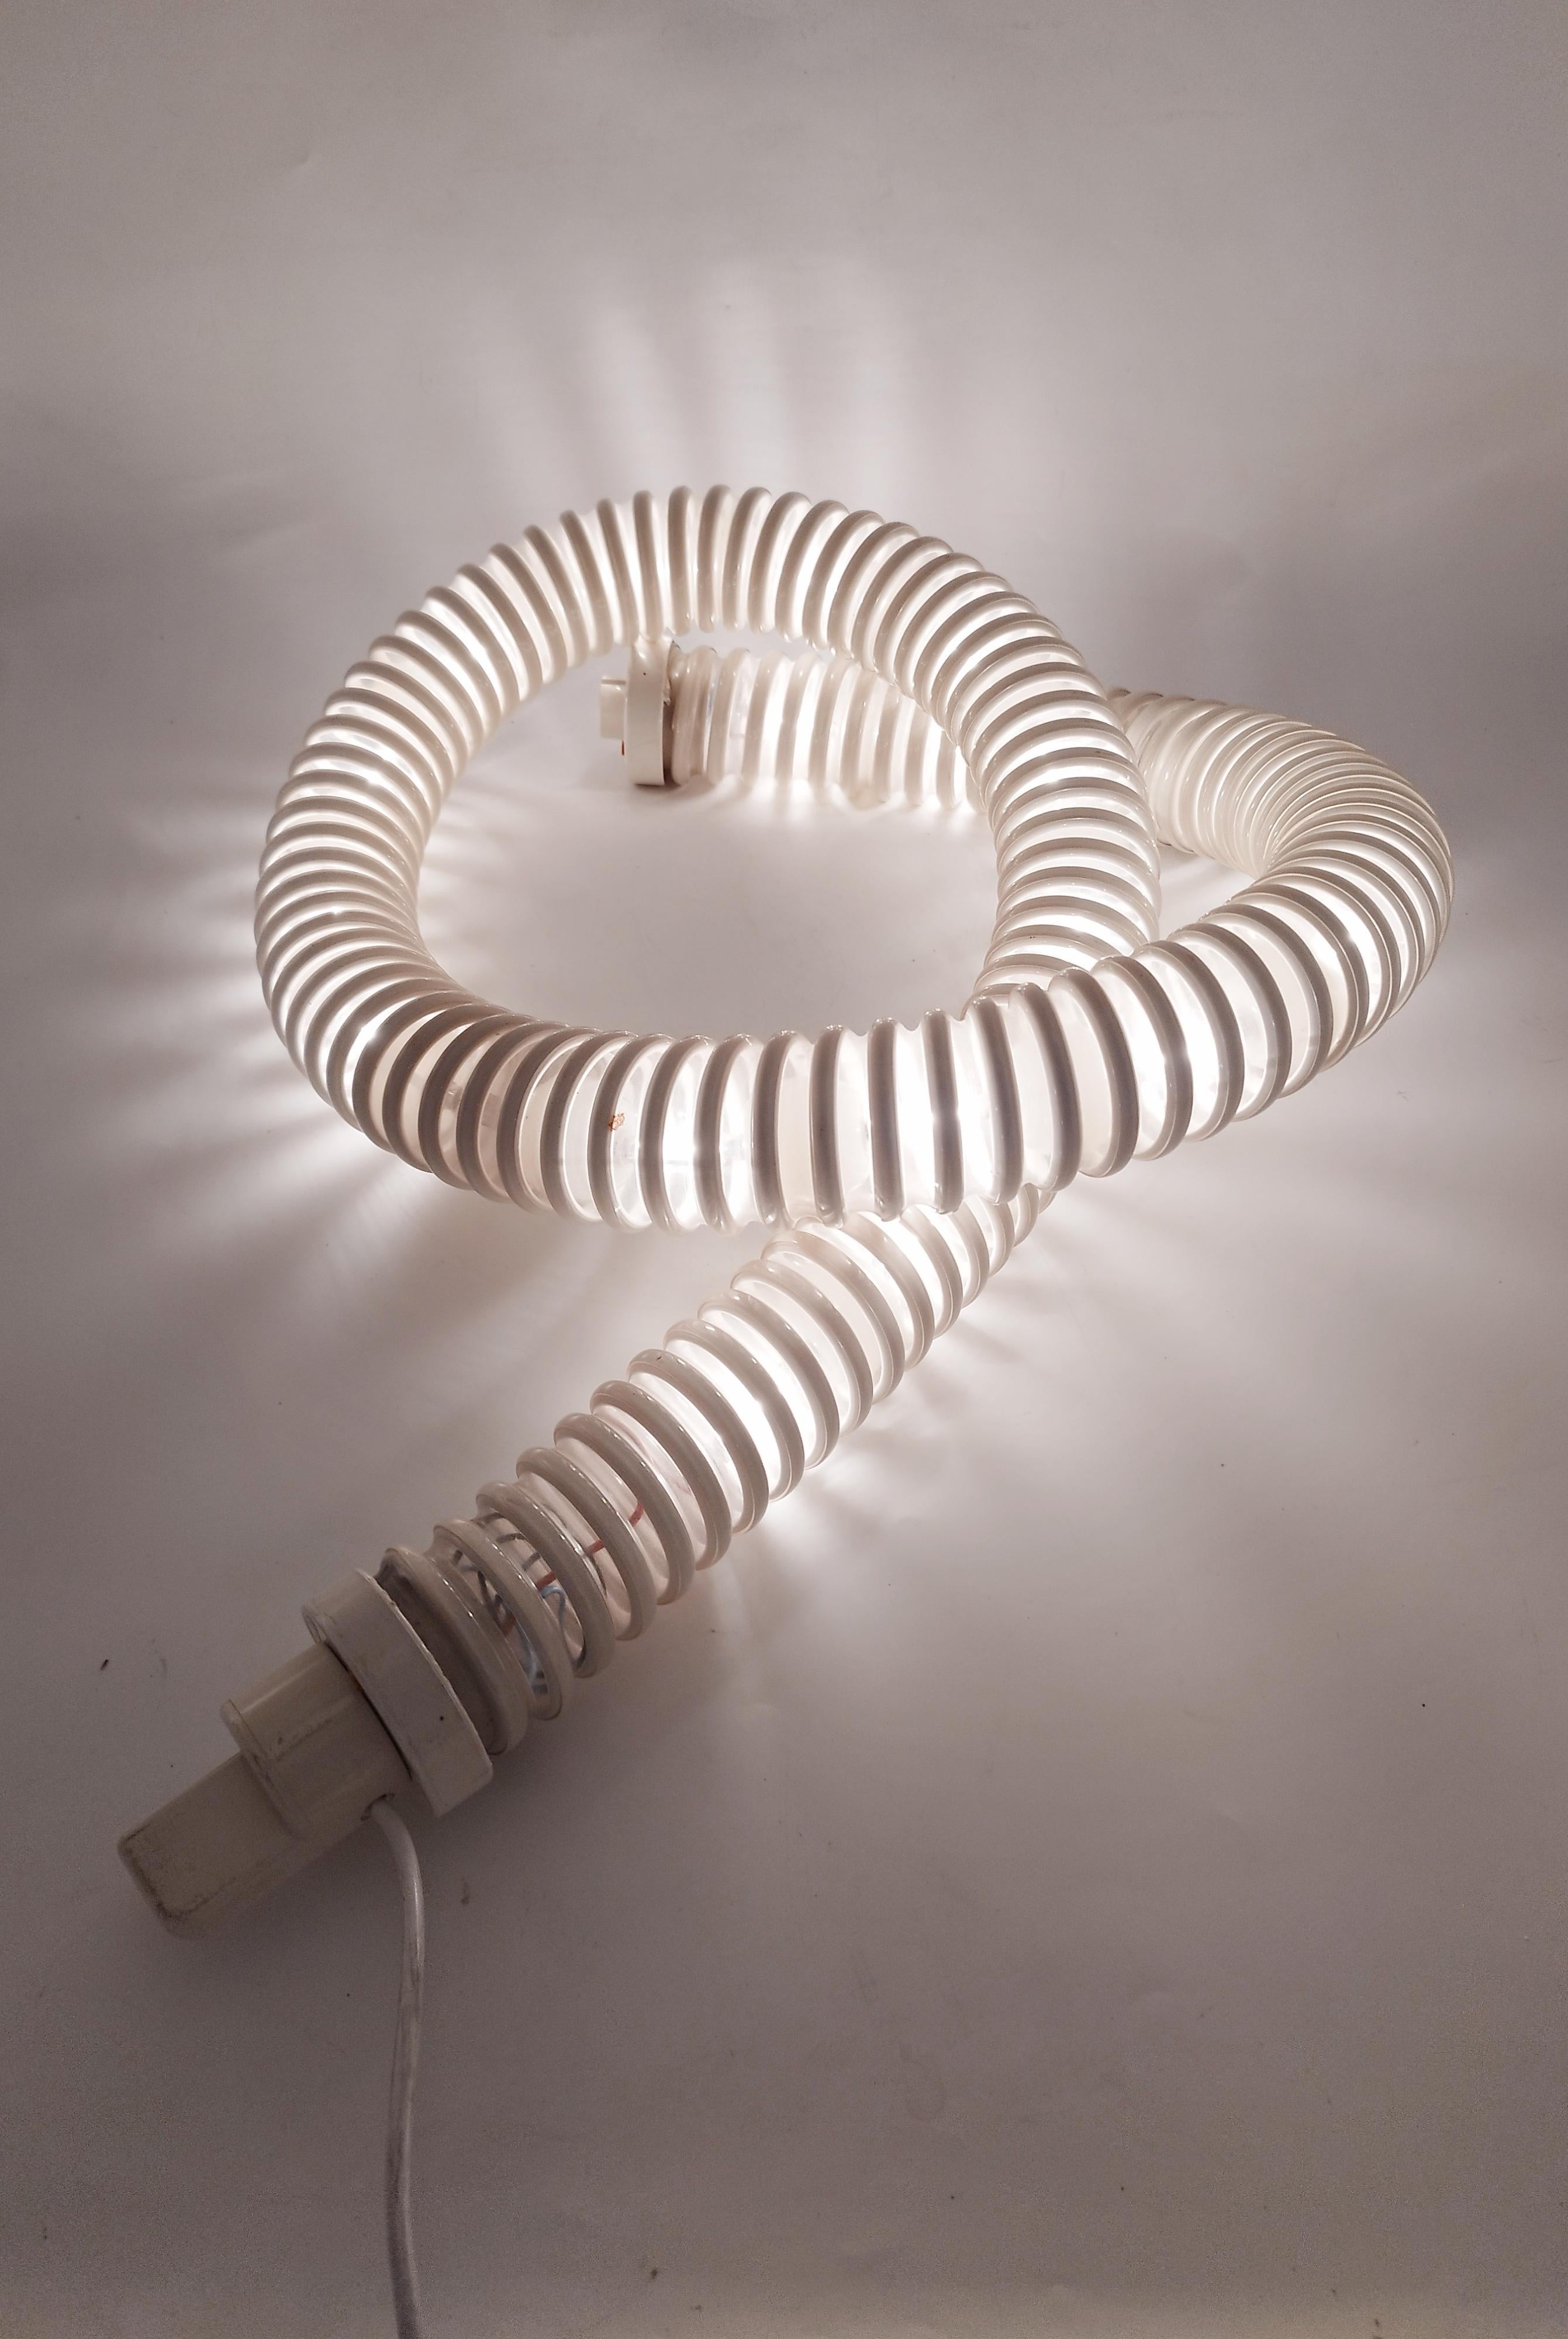 This unique table lamp, designed by Livio Castiglioni and Gianfranco Frattini for the Artemide brand in the 1970s, immediately entered the history of Italian and world design. The Boalum table or floor lamp is made of white plastic with resin and